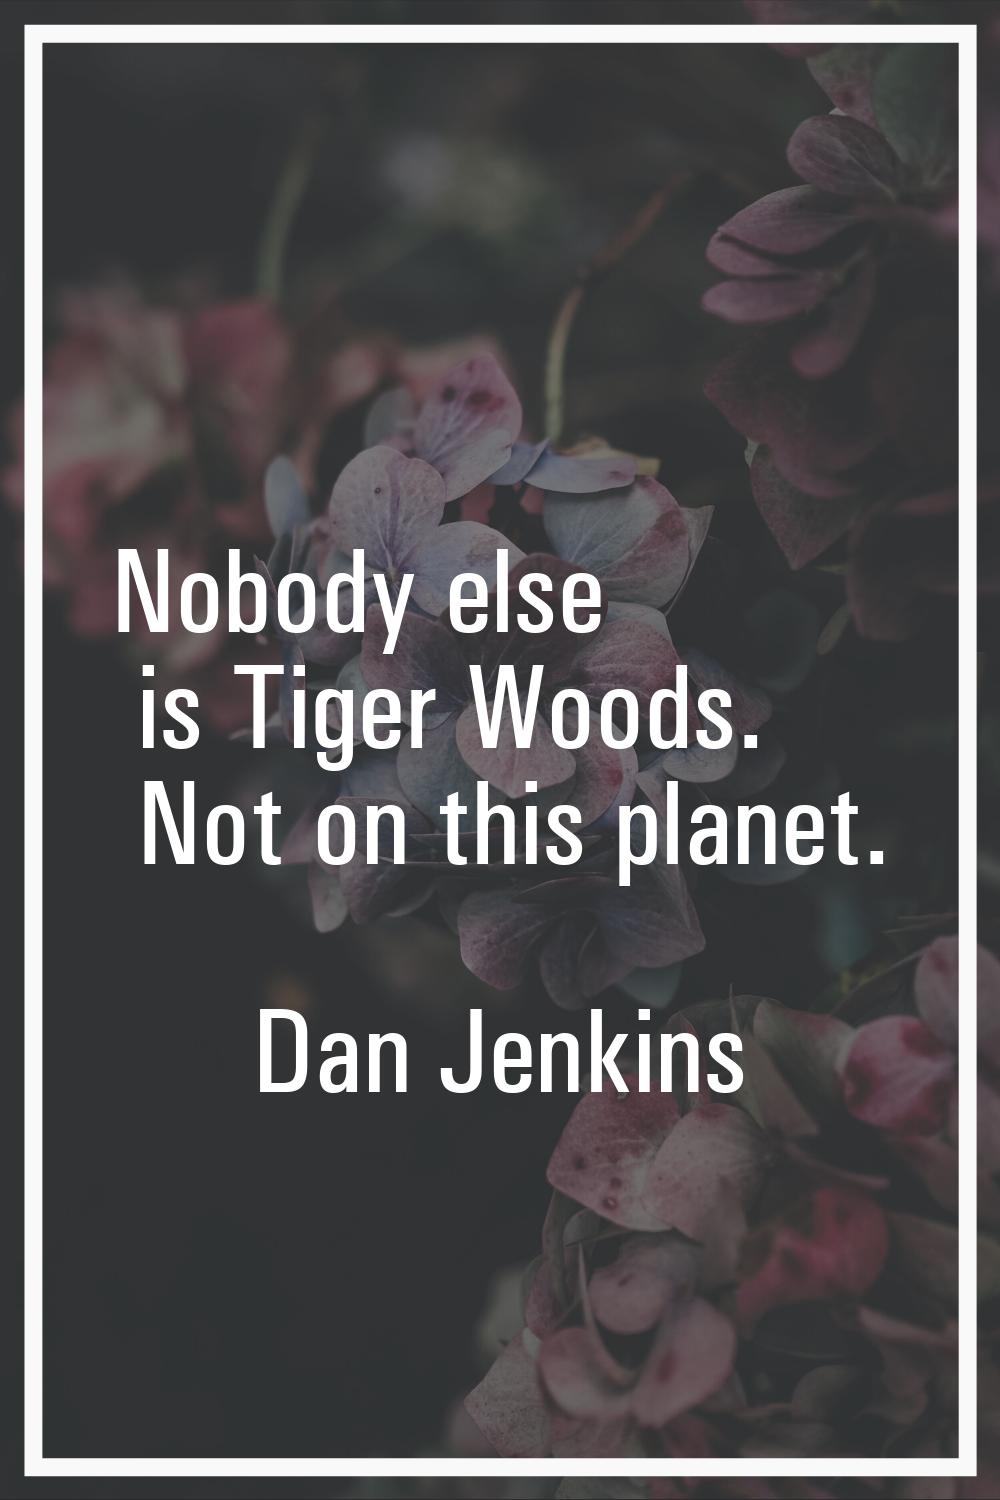 Nobody else is Tiger Woods. Not on this planet.